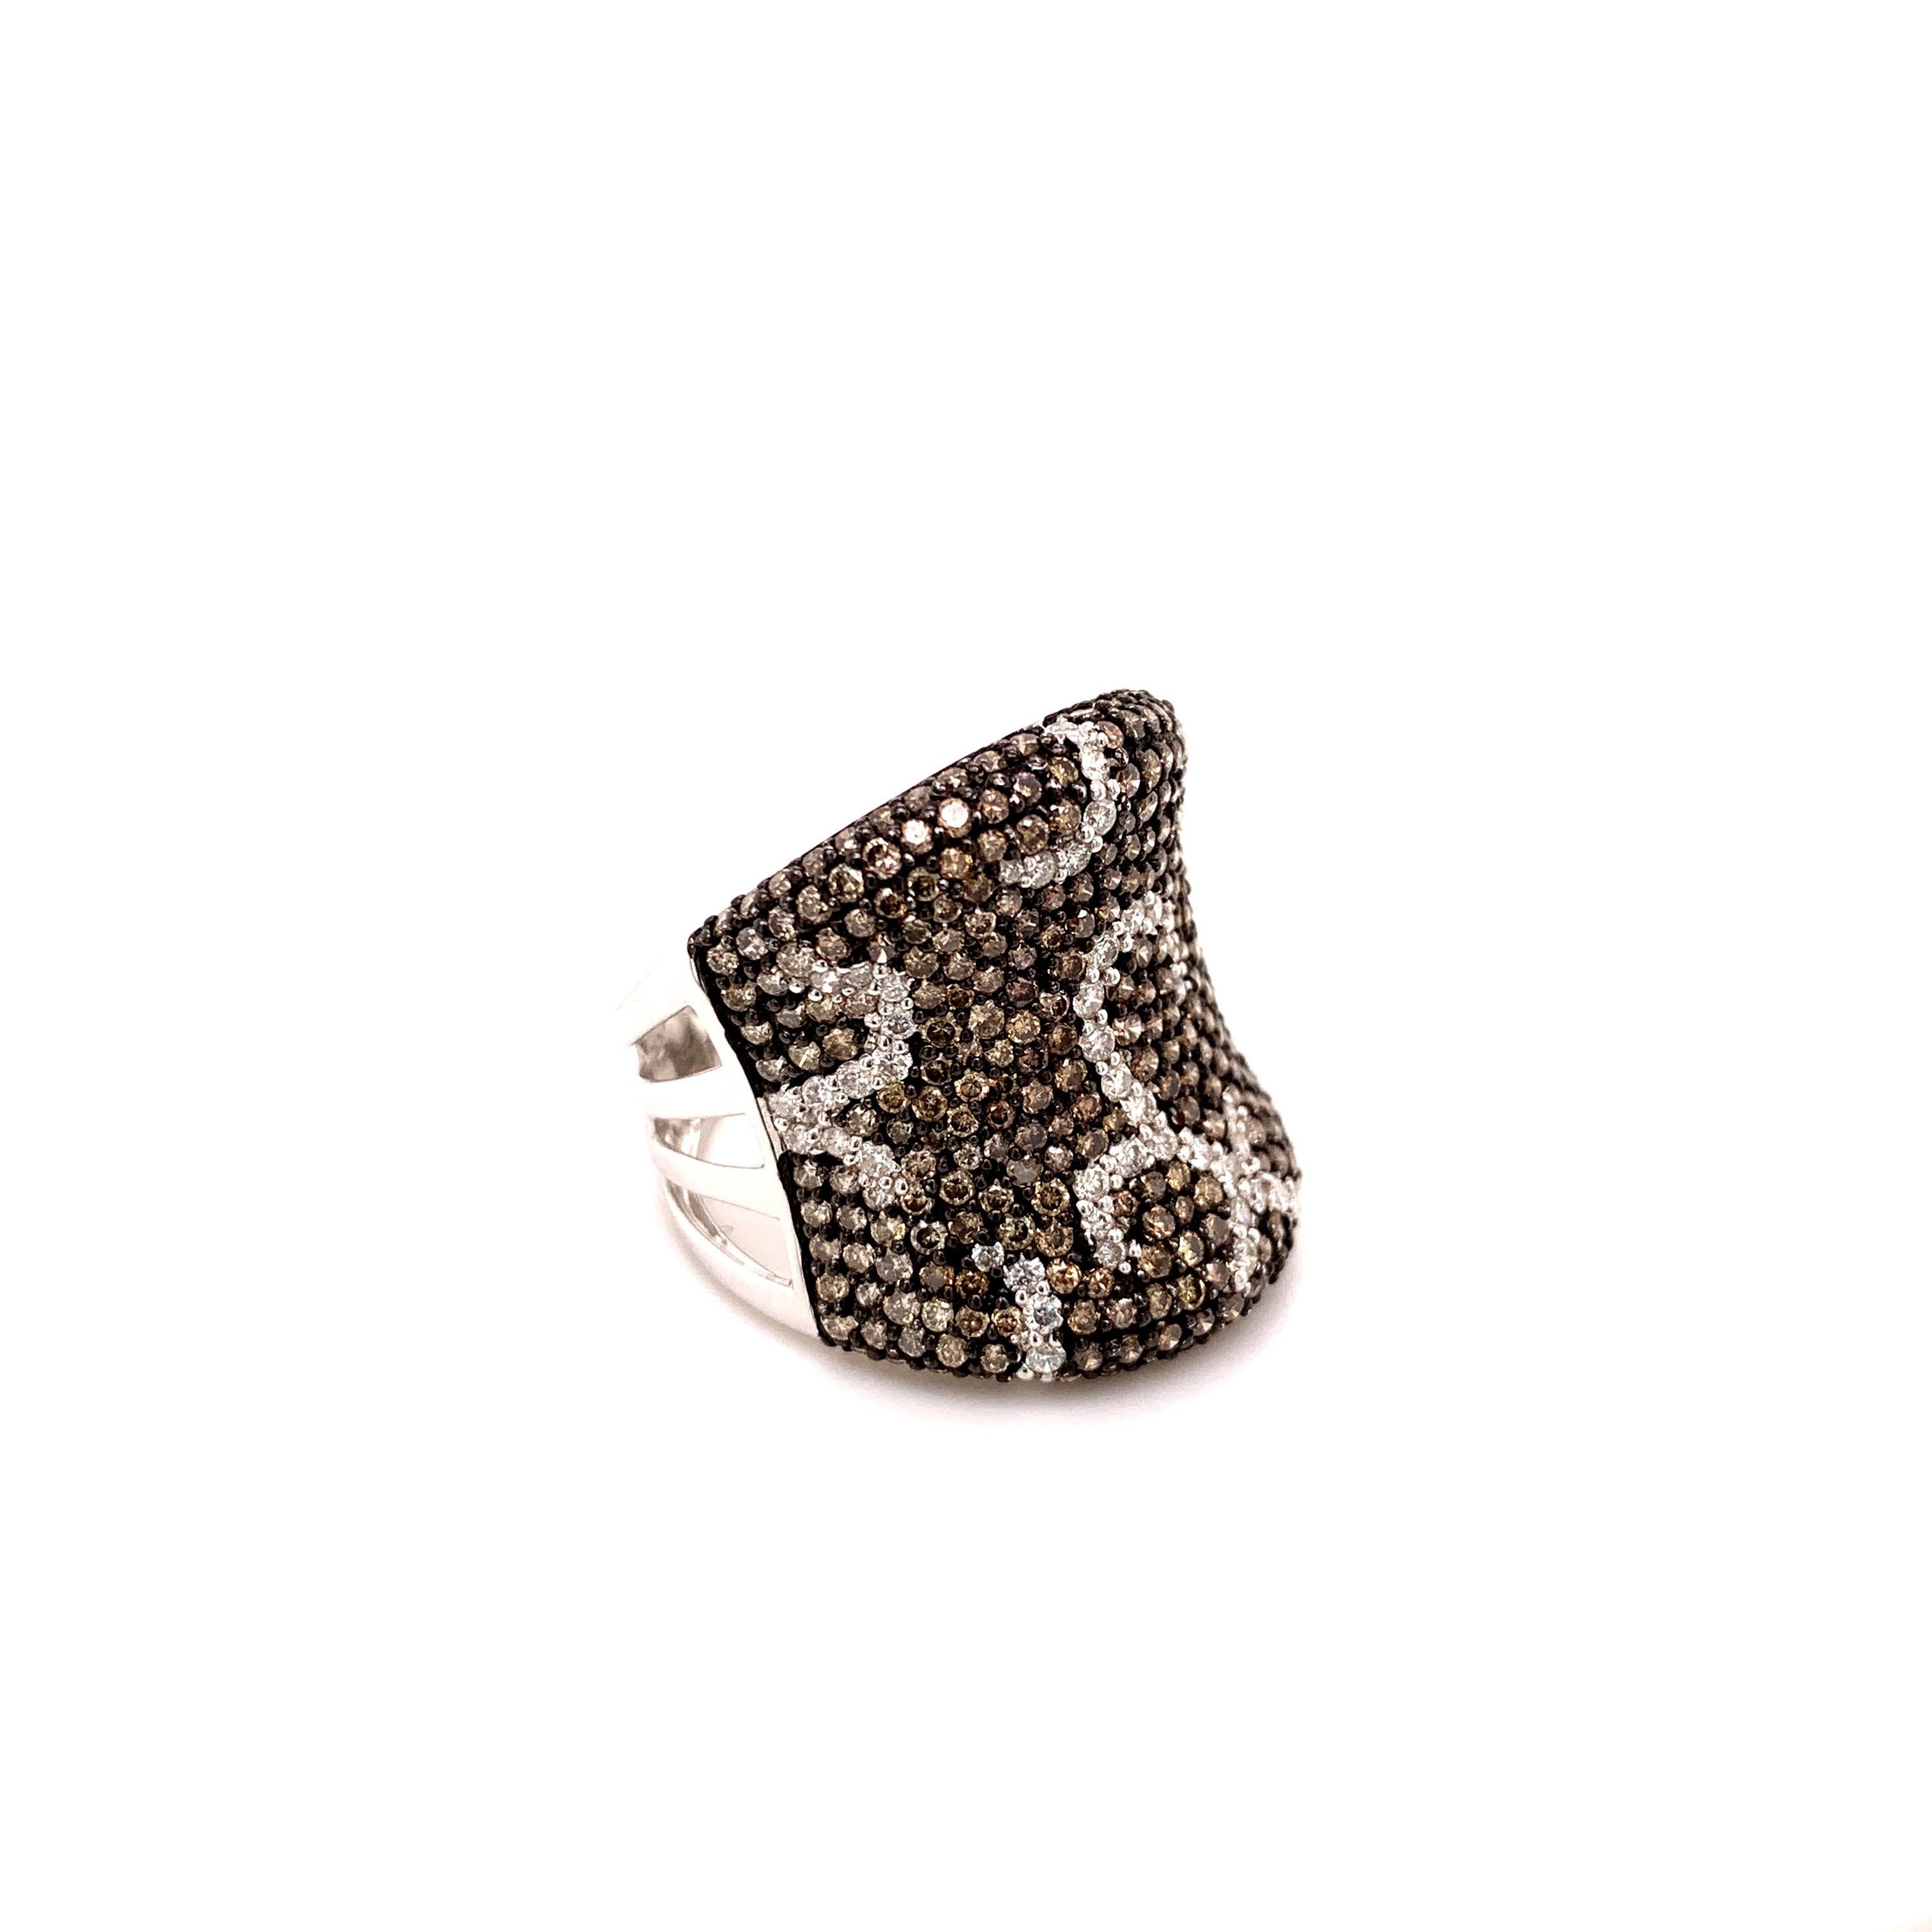 Stunning fancy brown diamond cocktail ring. Sparkling round brilliant cut 2.04 carats fancy brown diamond accented with round brilliant cut white diamond in a swirl design. The contemporary handcrafted wide band set in high polished 18 karats white